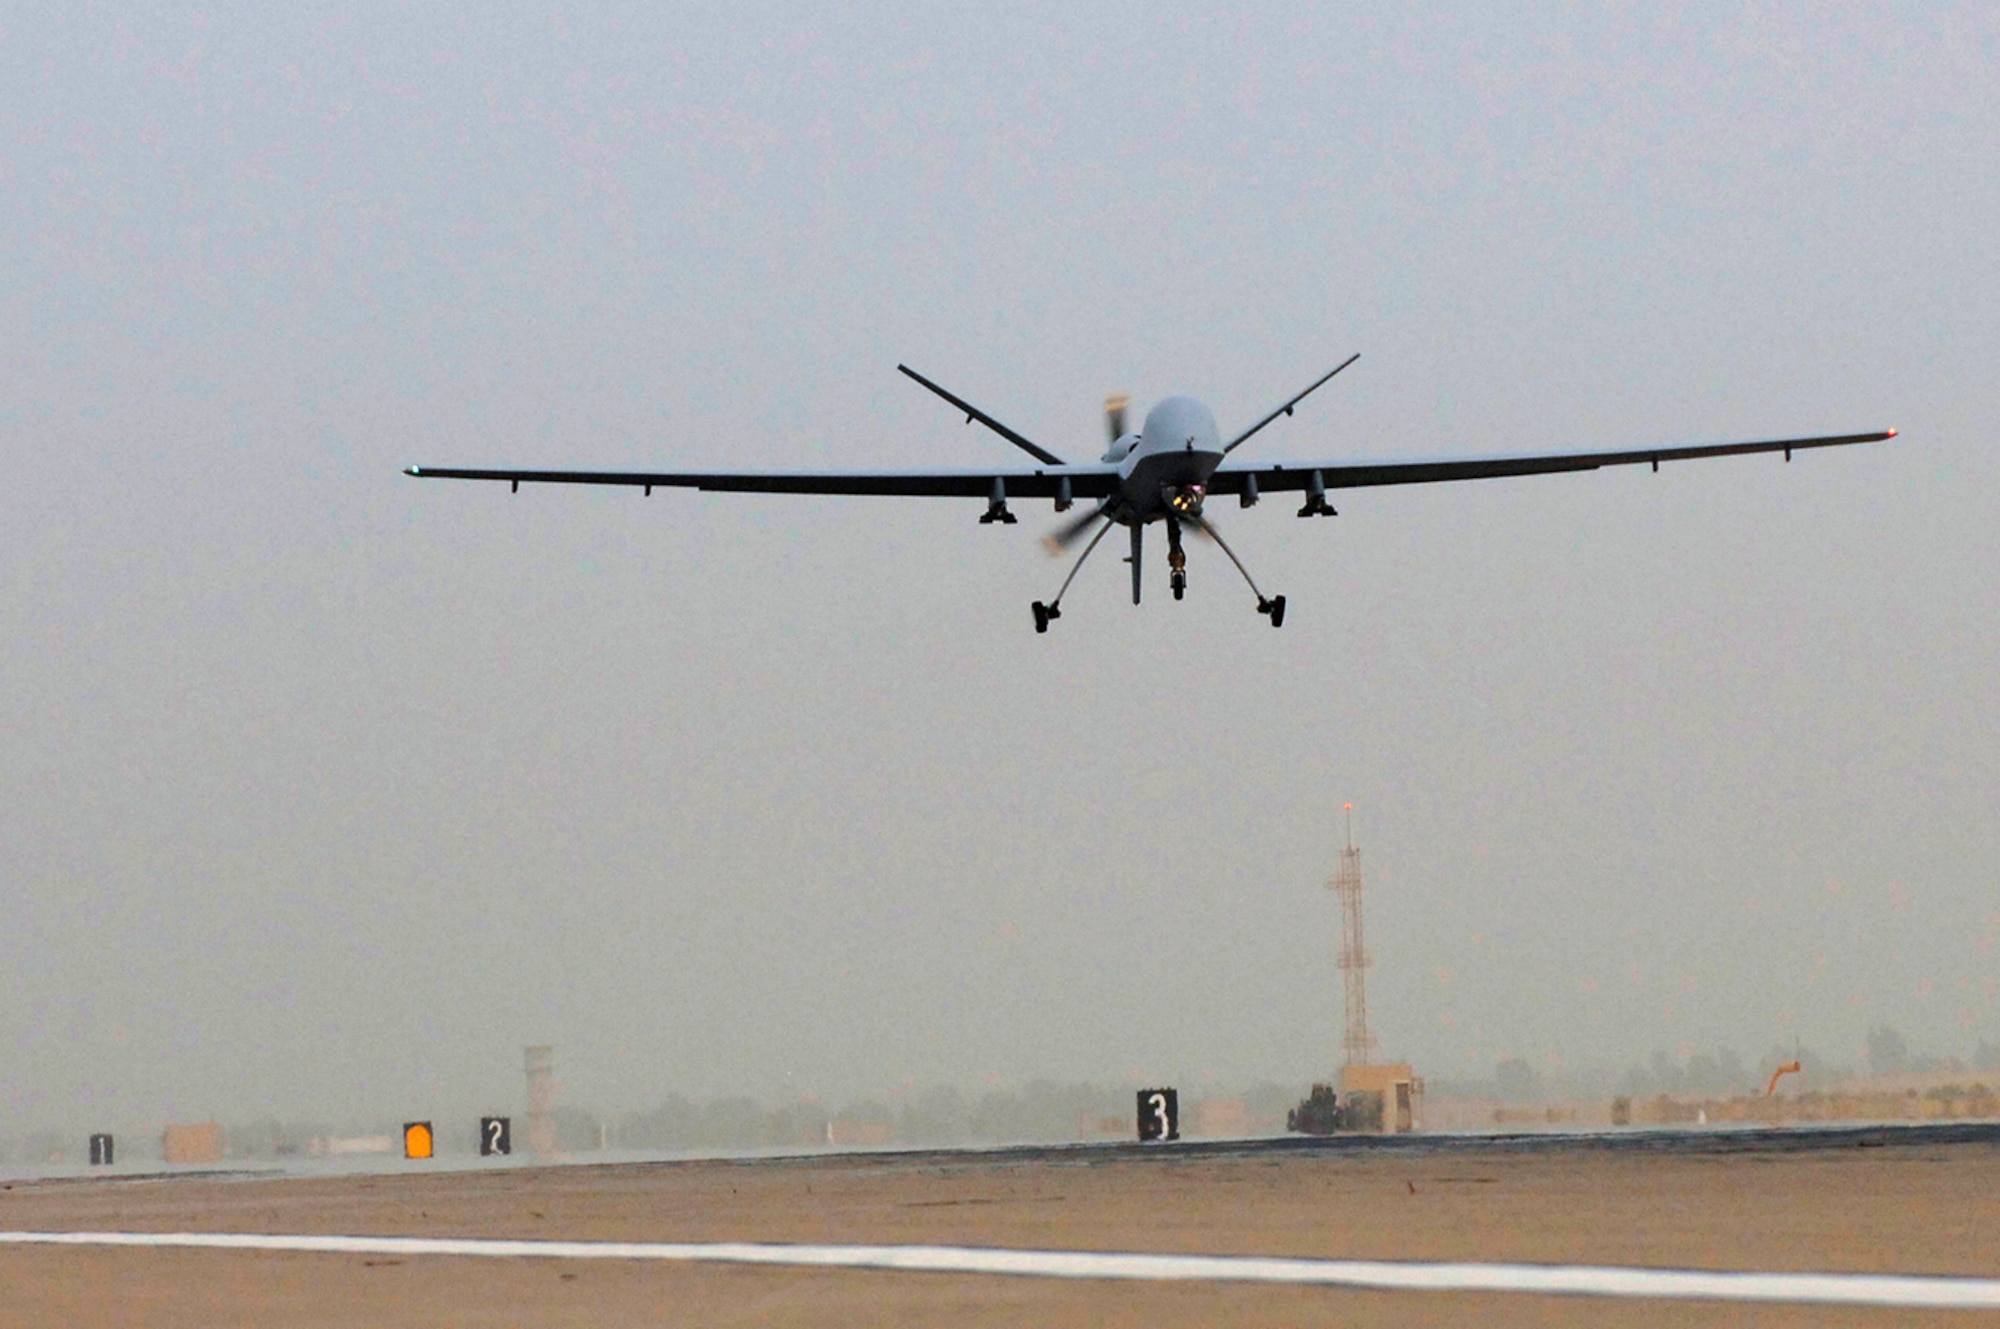 JOINT BASE BALAD, Iraq -- An MQ-9 Reaper remotely piloted aircraft takes off from Joint Base Balad, Iraq, July 17. The Reaper can loiter over battlefields or targets for hours at a time without refueling and carries up to 3,750 pounds of laser-guided munitions, giving ground commanders unprecedented situational awareness and the ability to bring the right amount of force to bear on a target. The Reaper, deployed from Creech Air Force Base, Nev., flew its first combat mission over Iraq July 18. (U.S. Air Force photo/Senior Airman Julianne Showalter)